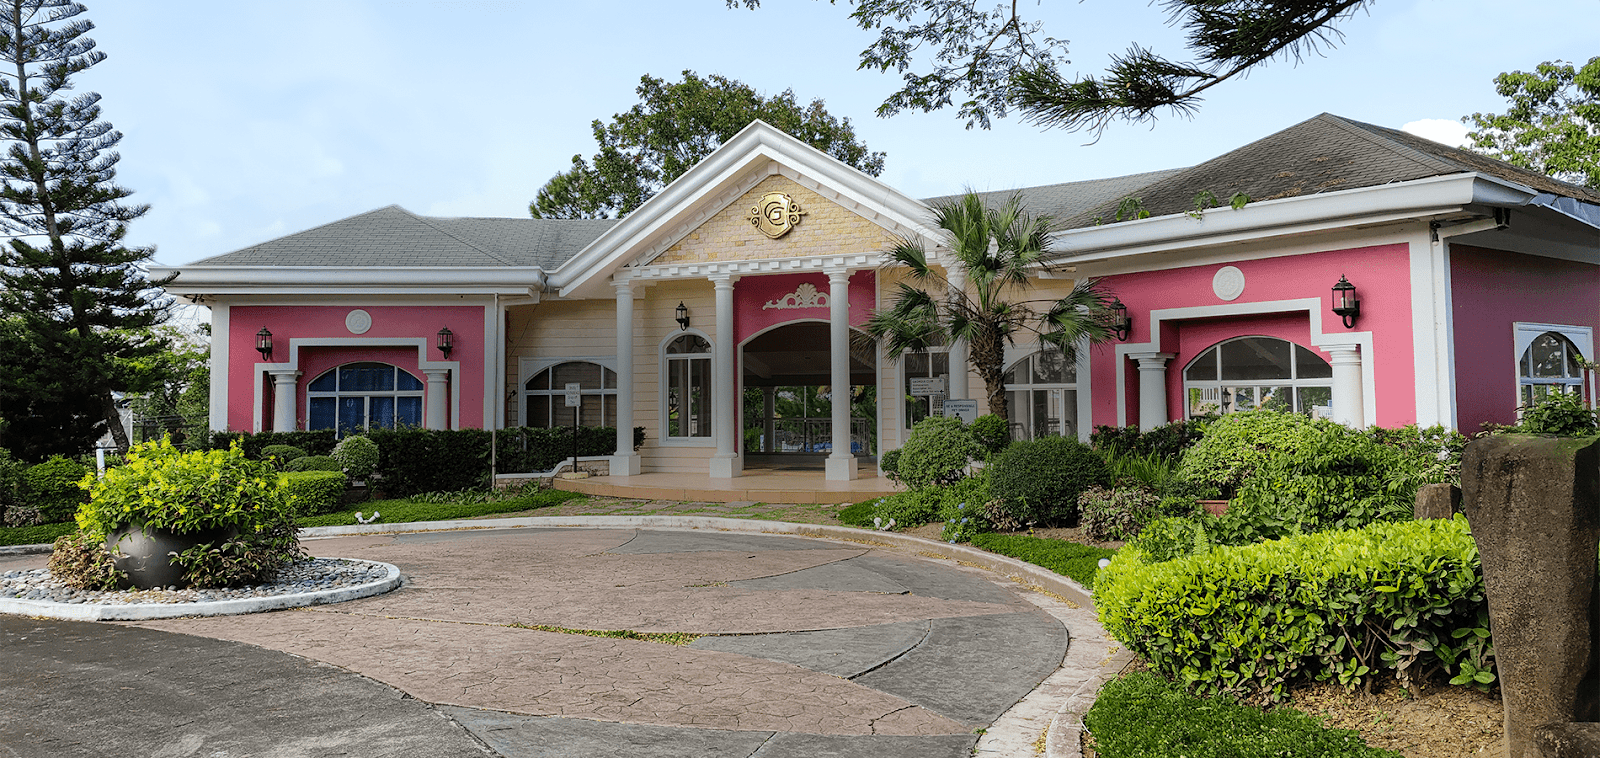 The Clubhouse is one of the amenities in Brittany Santa Rosa's Georgia Club 